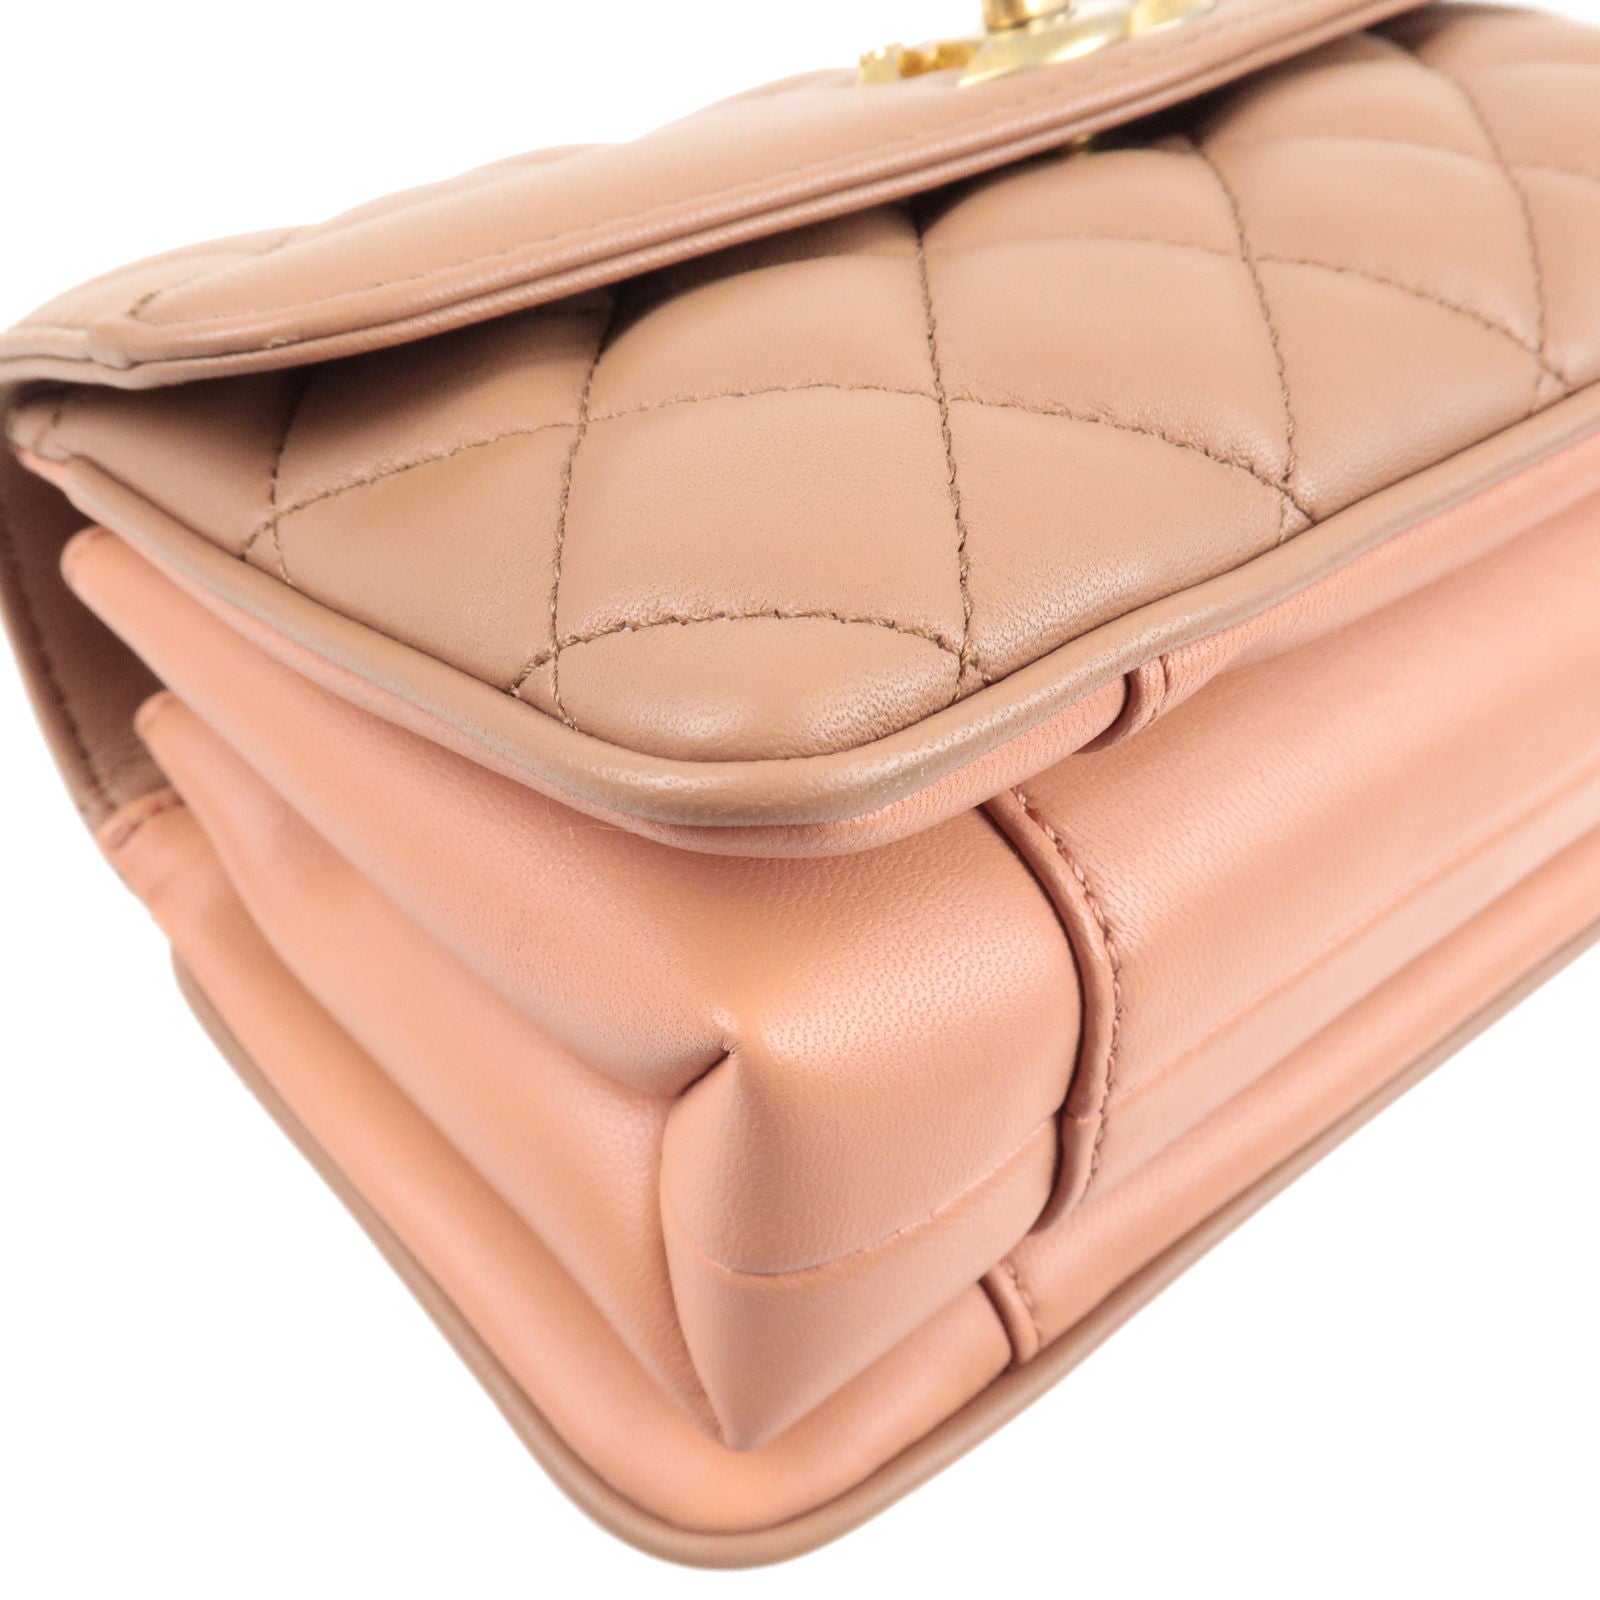 ep_vintage luxury Store - Double - Pink – dct - Skin - Shoulder